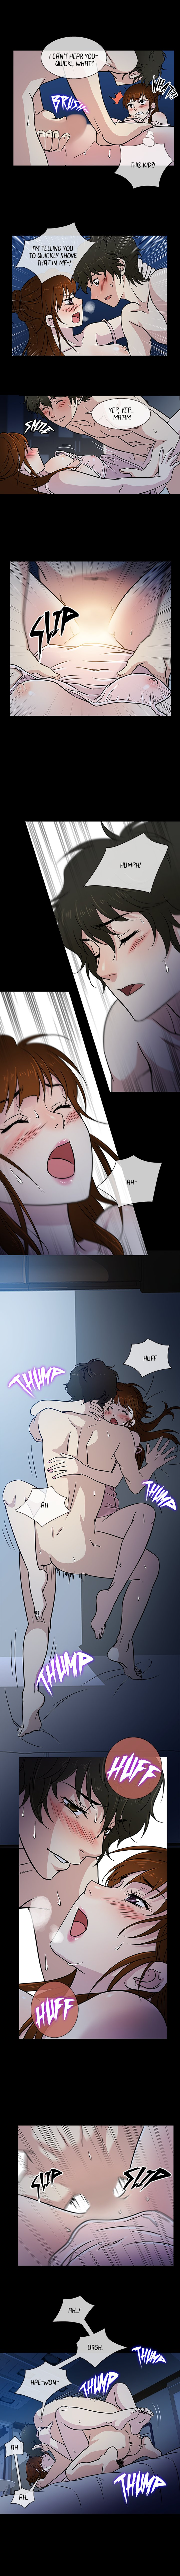 She’s Back - Chapter 7 Page 3